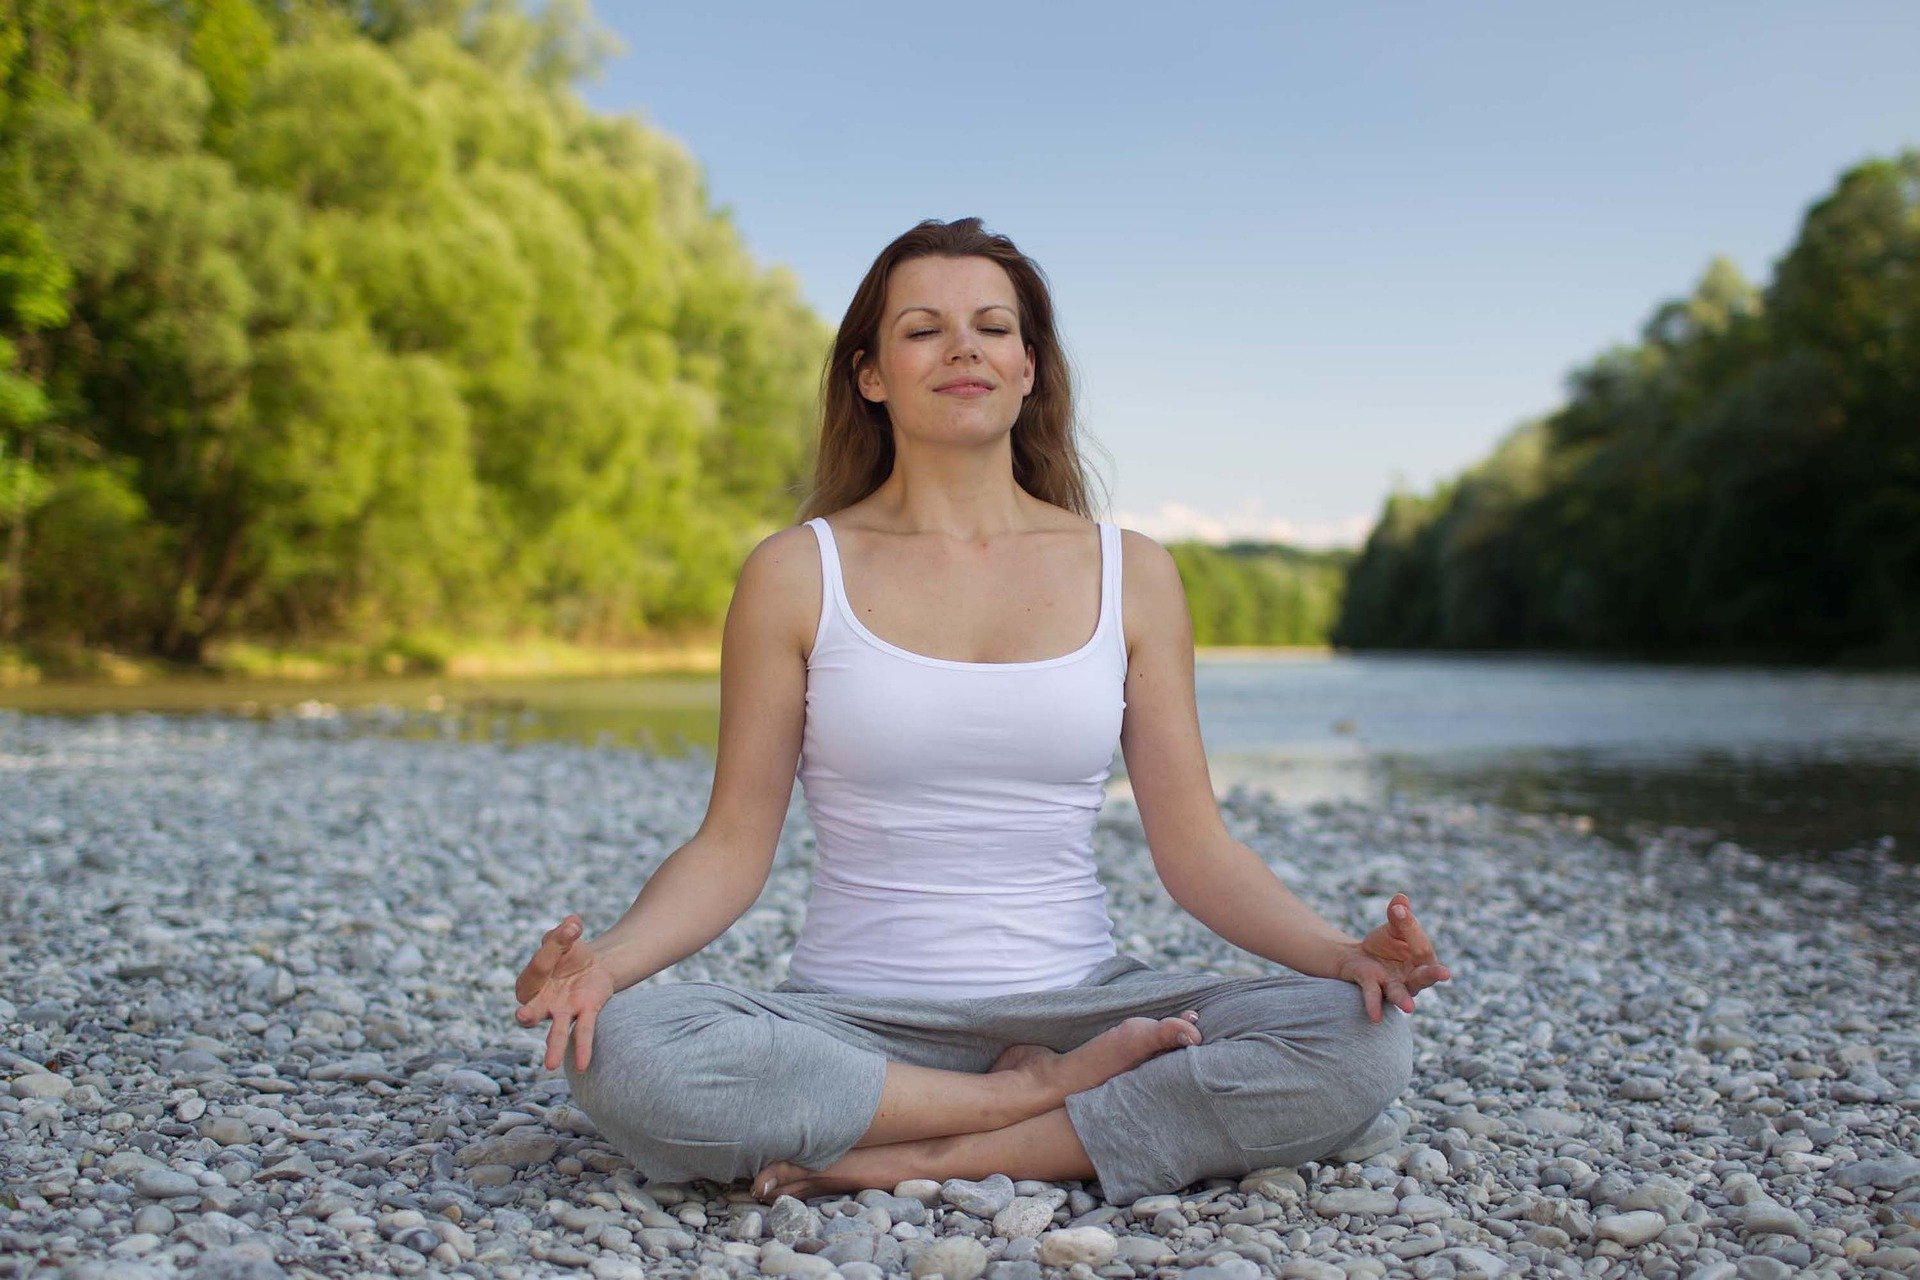 A woman practices meditation outdoors